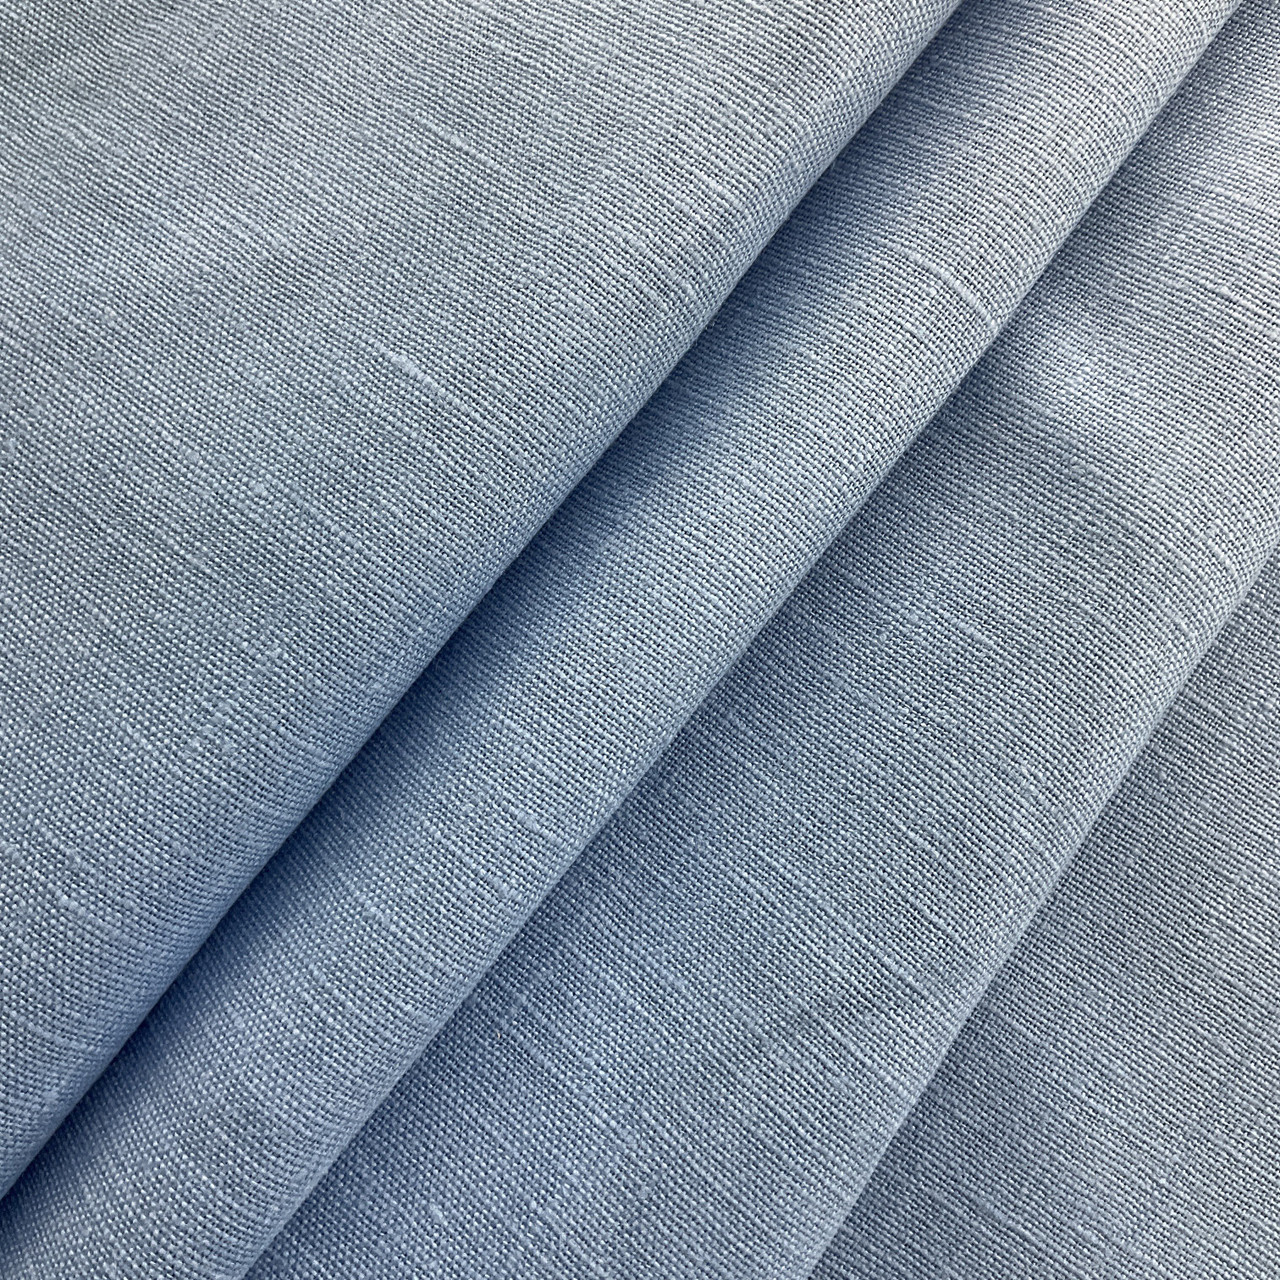 Exquisite Polyester 403 CHAMBRAY BLUE - 5000 Meter – The